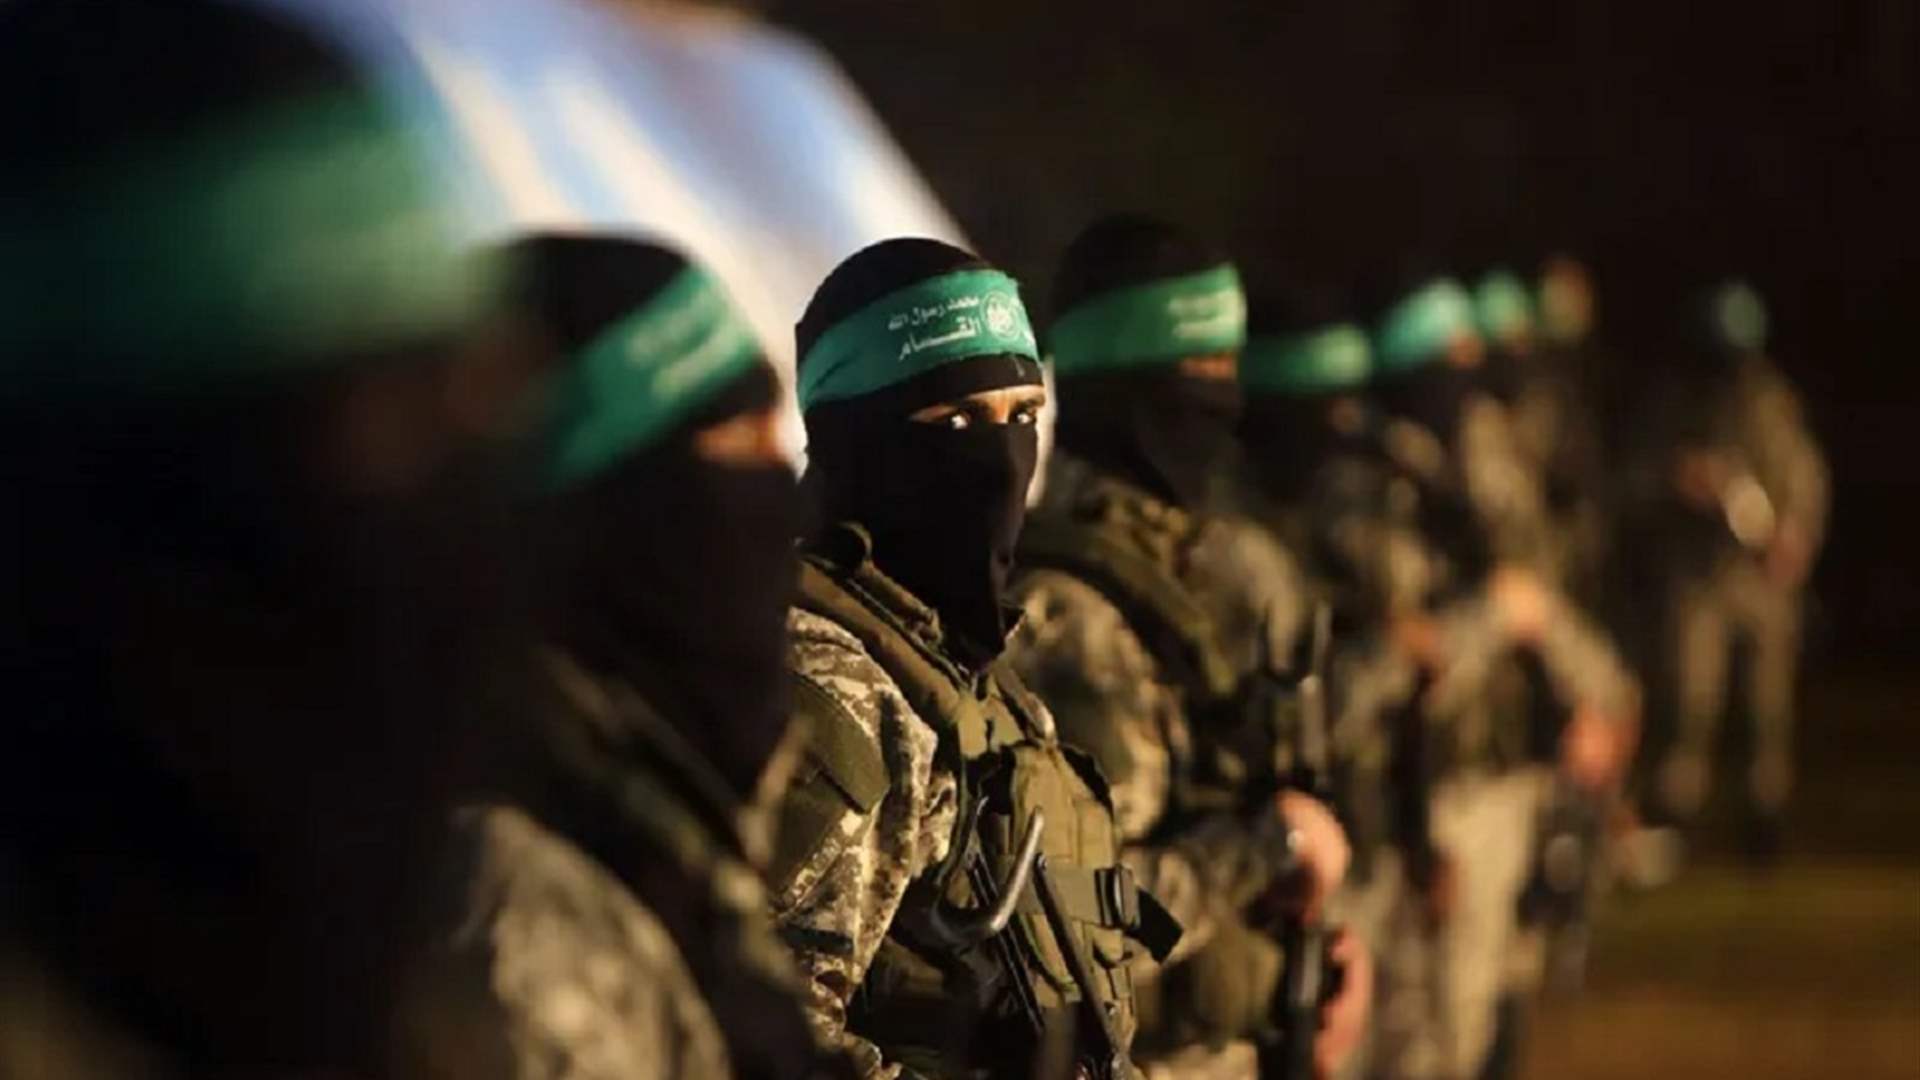 Hamas Delivers Response on Potential Ceasefire Agreement in Gaza